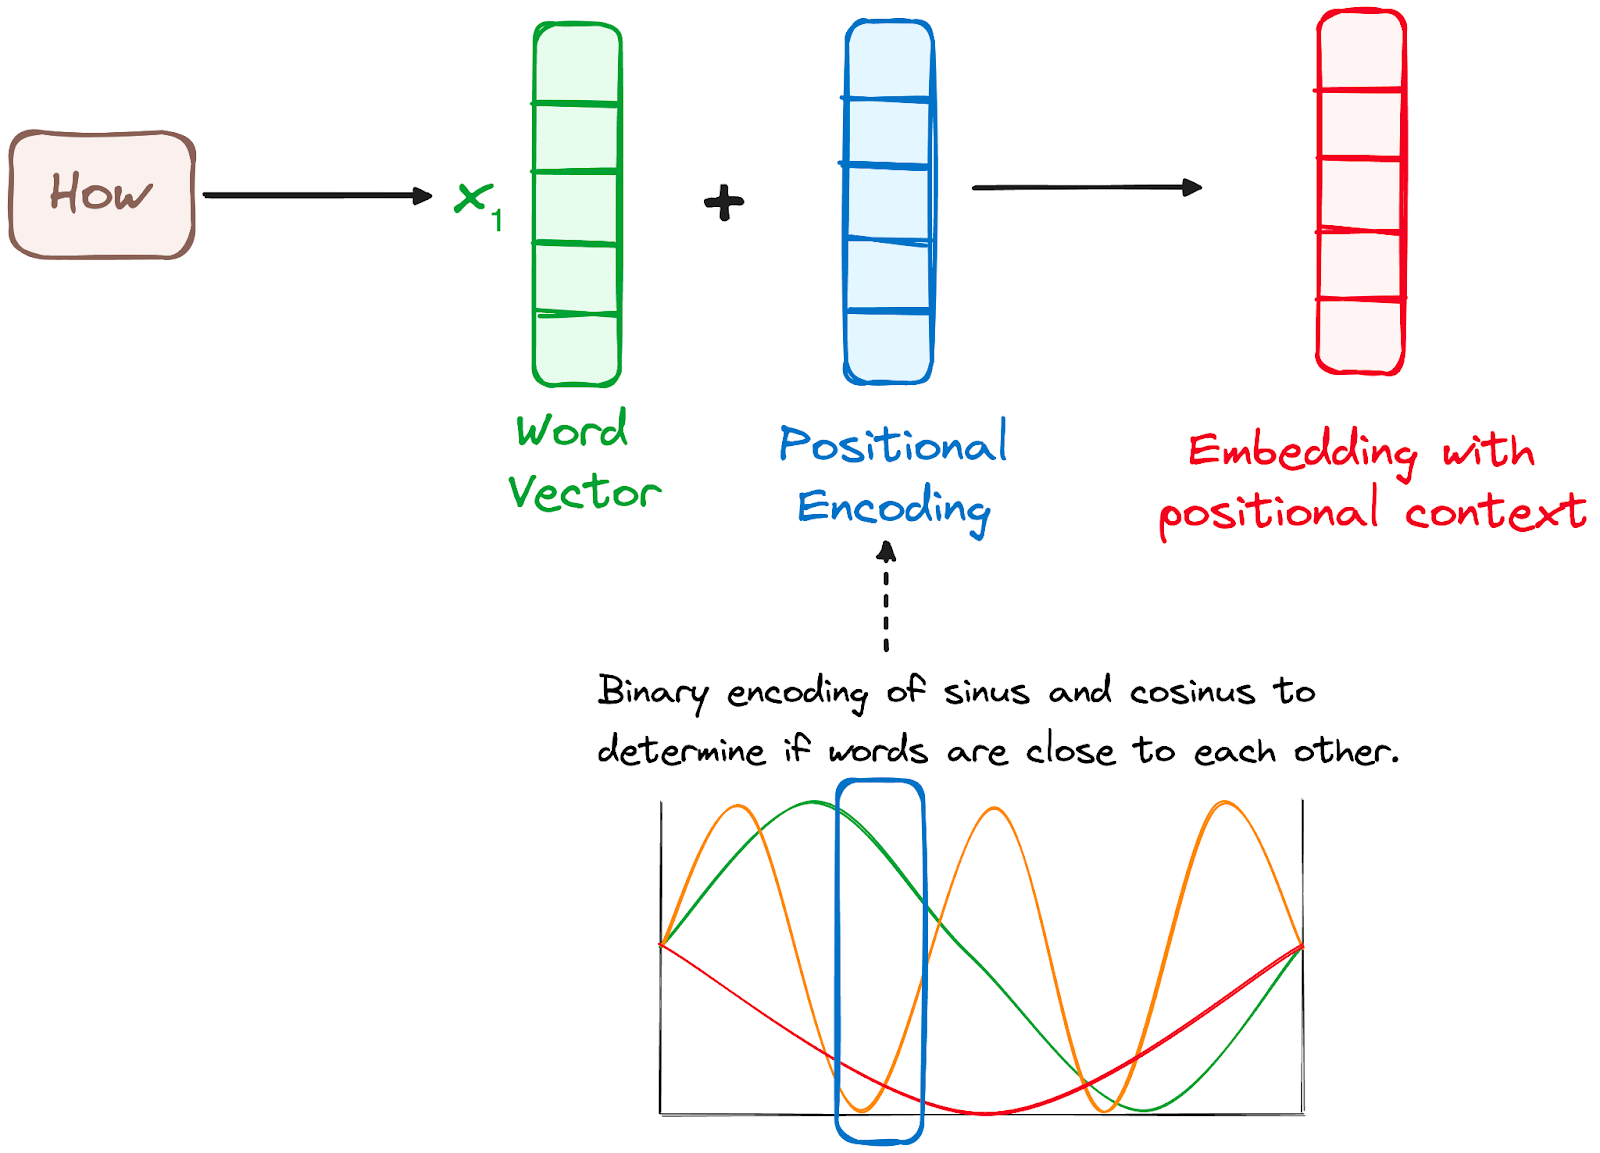 Encoder’s workflow. How positional encoding works.